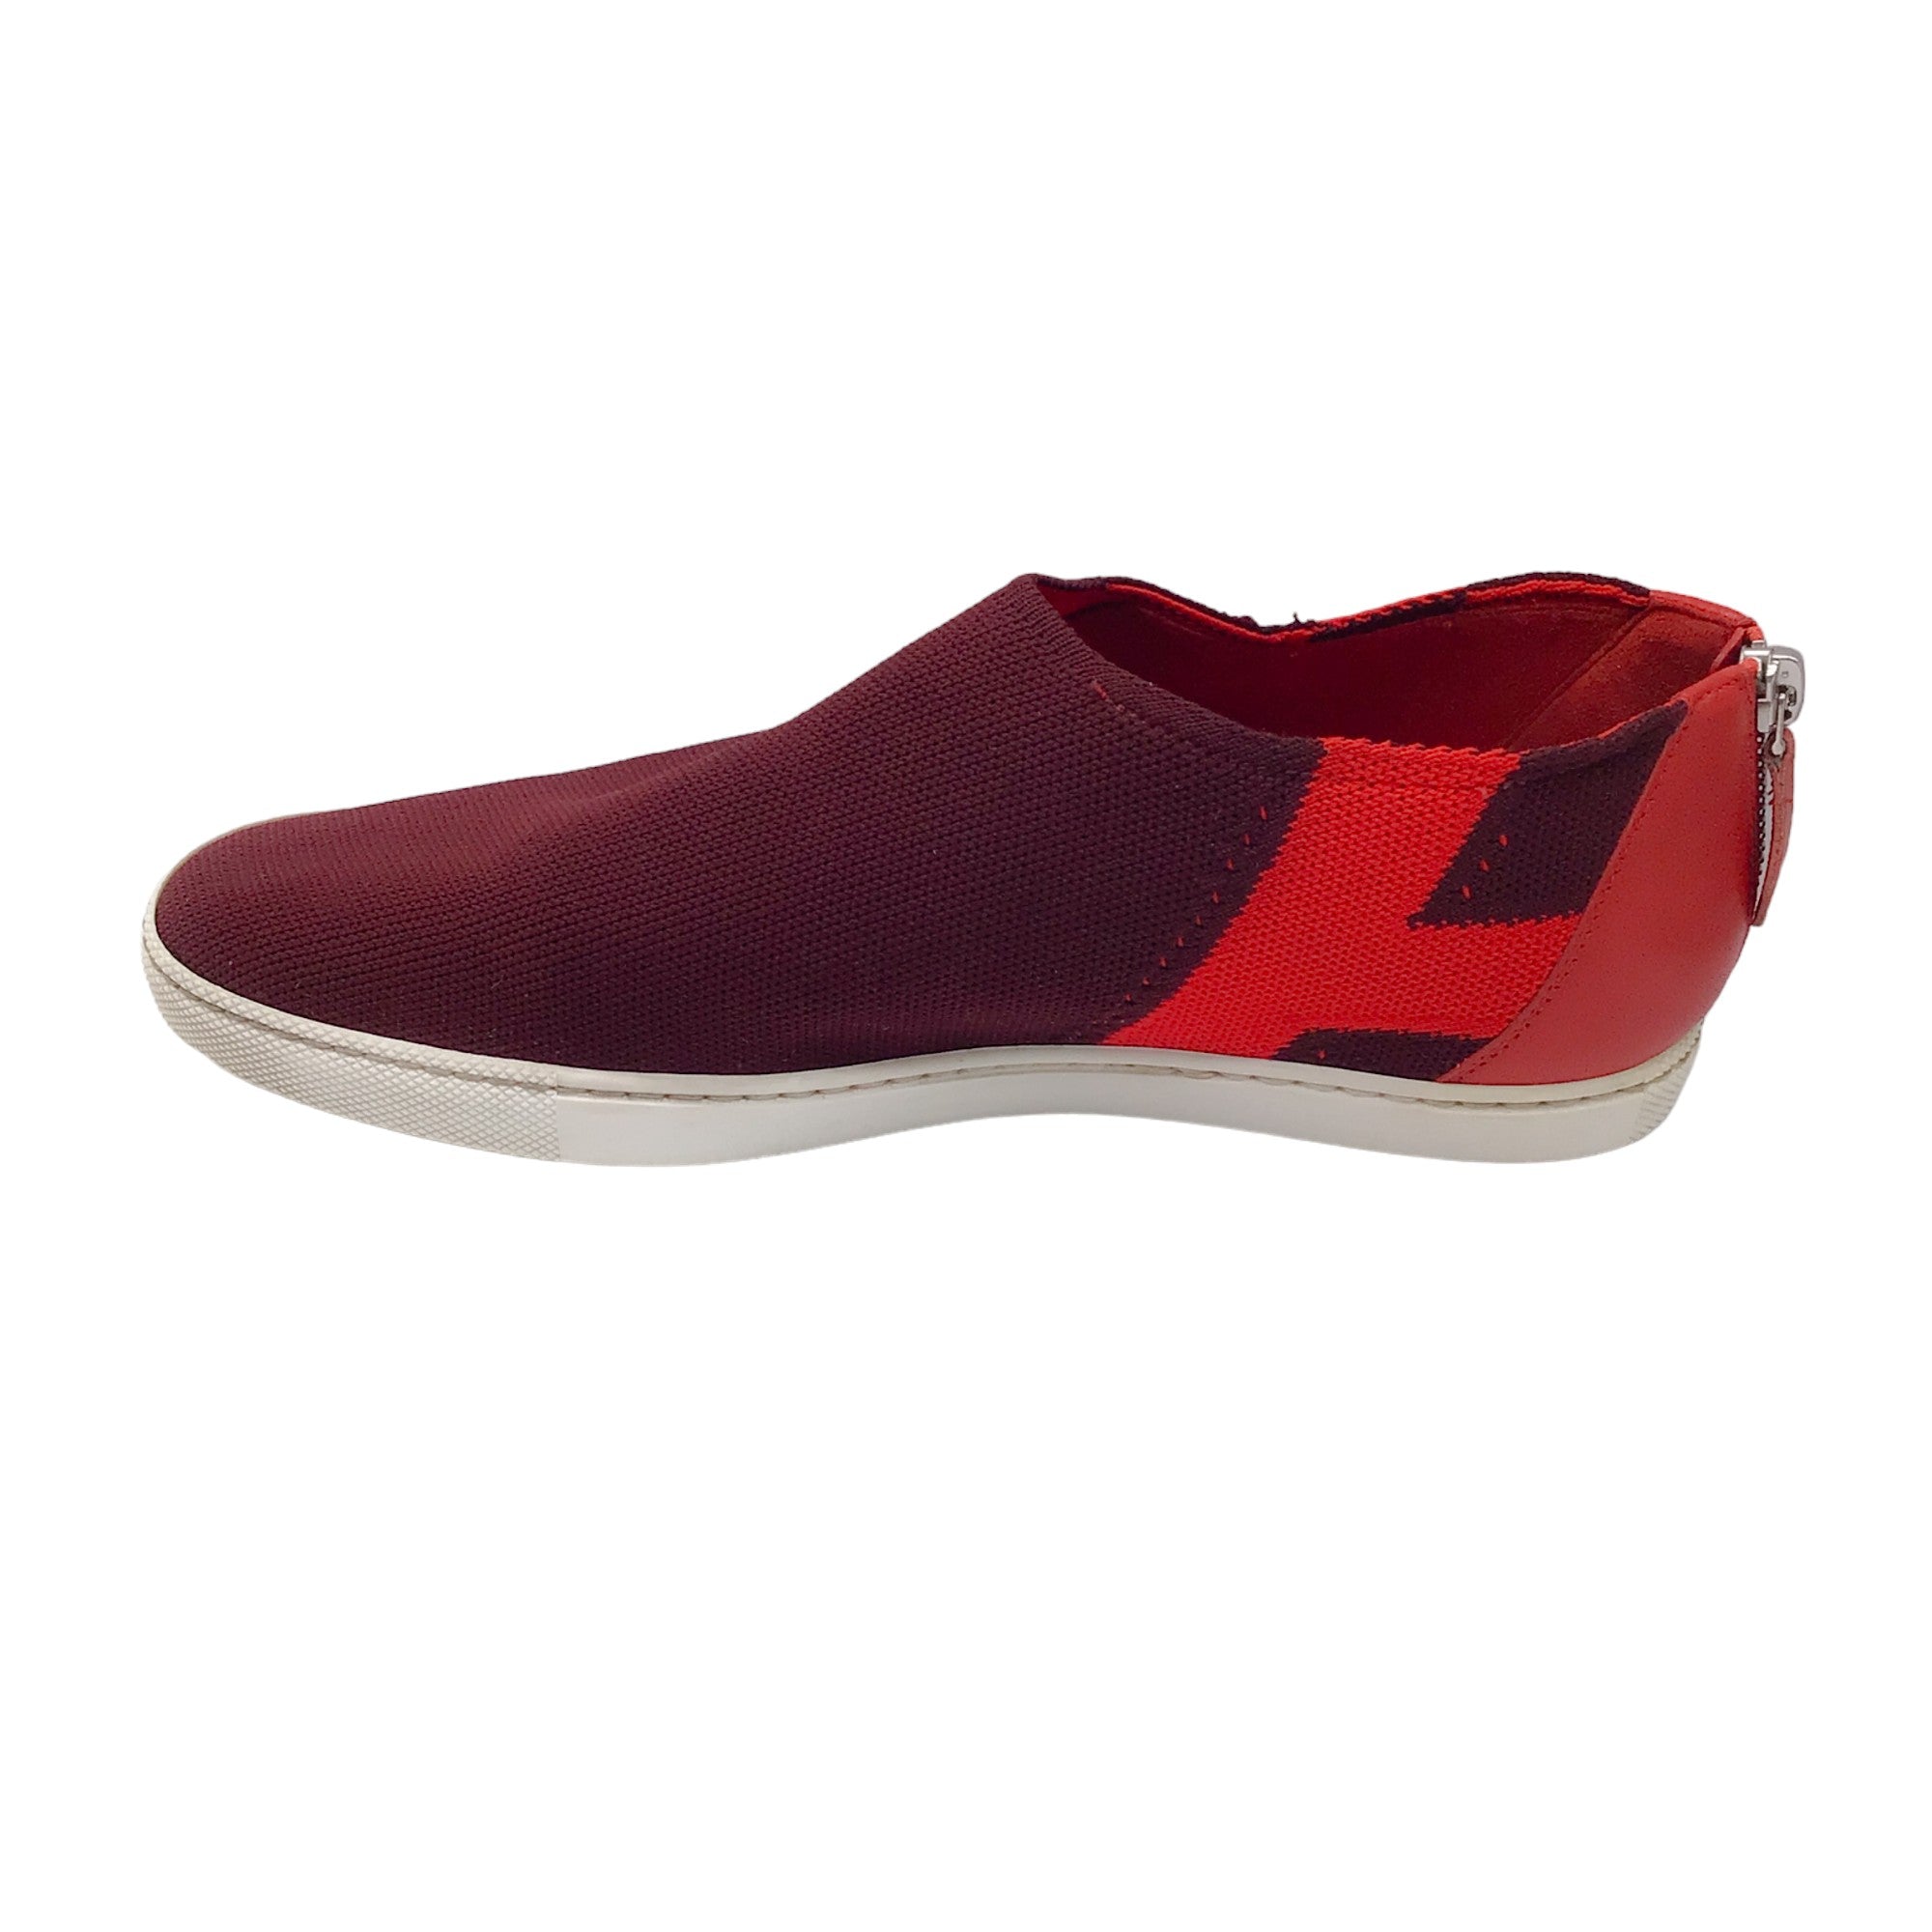 Hermes Burgundy / Red Leather Trimmed Knit Sneakers